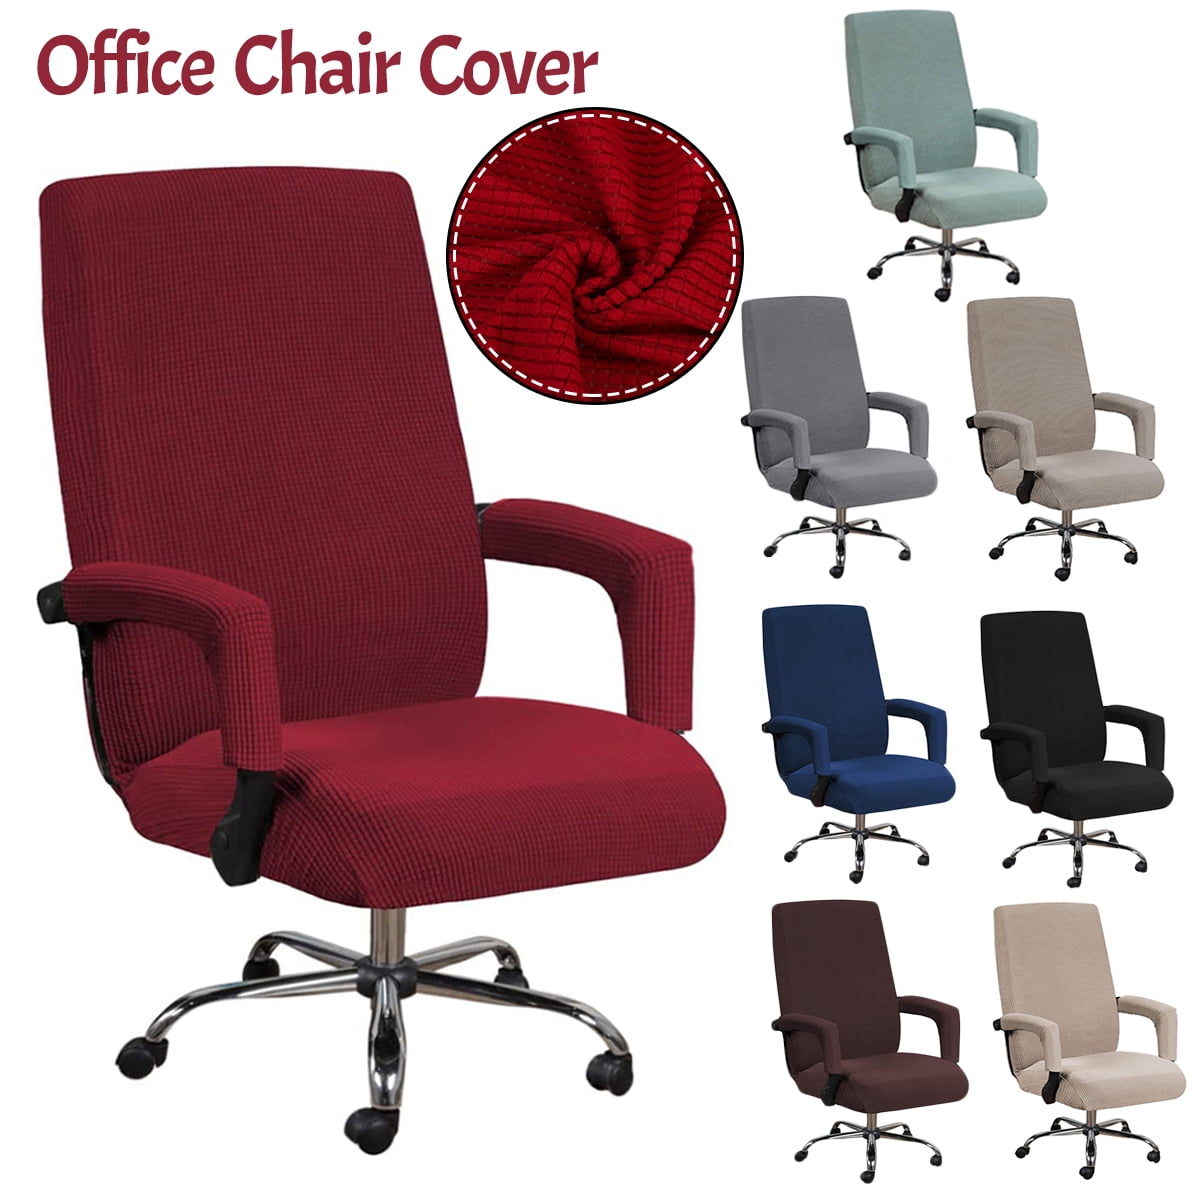 CAVEEN Office Chair Covers High Stretch Chair Cover Protectors Spandex Jacquard Fabric Office Computer Chair Cover with Armrest Covers Removable Washable High Back Slipcovers 